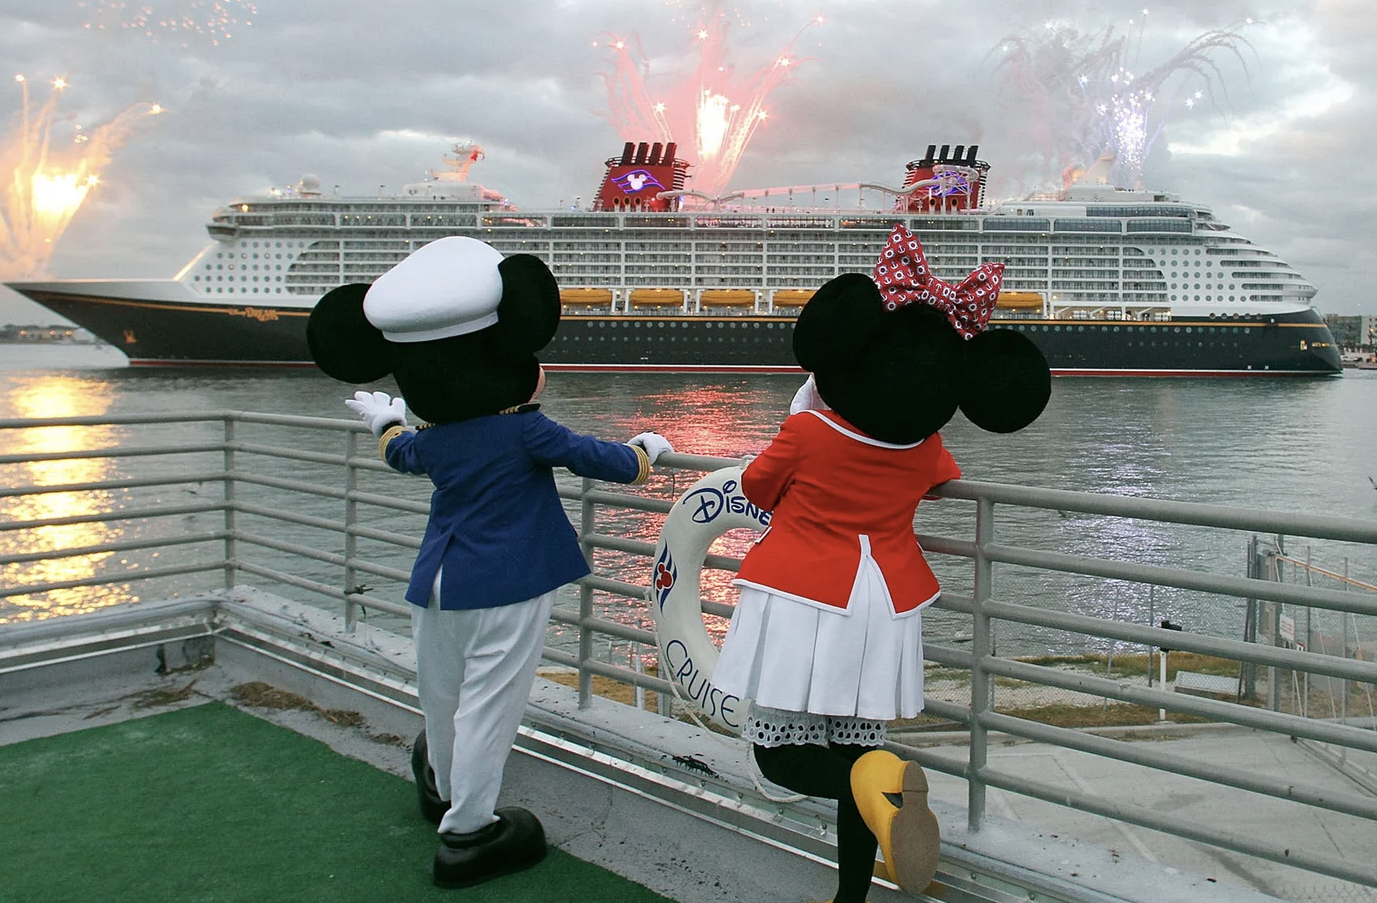 Mickey’s new home: Only an hour east of Walt Disney World in Orlando, the waterside modifications to Port Canaveral’s CT8 and CT10 terminals resulted in an attractive home port for the Disney fleet.